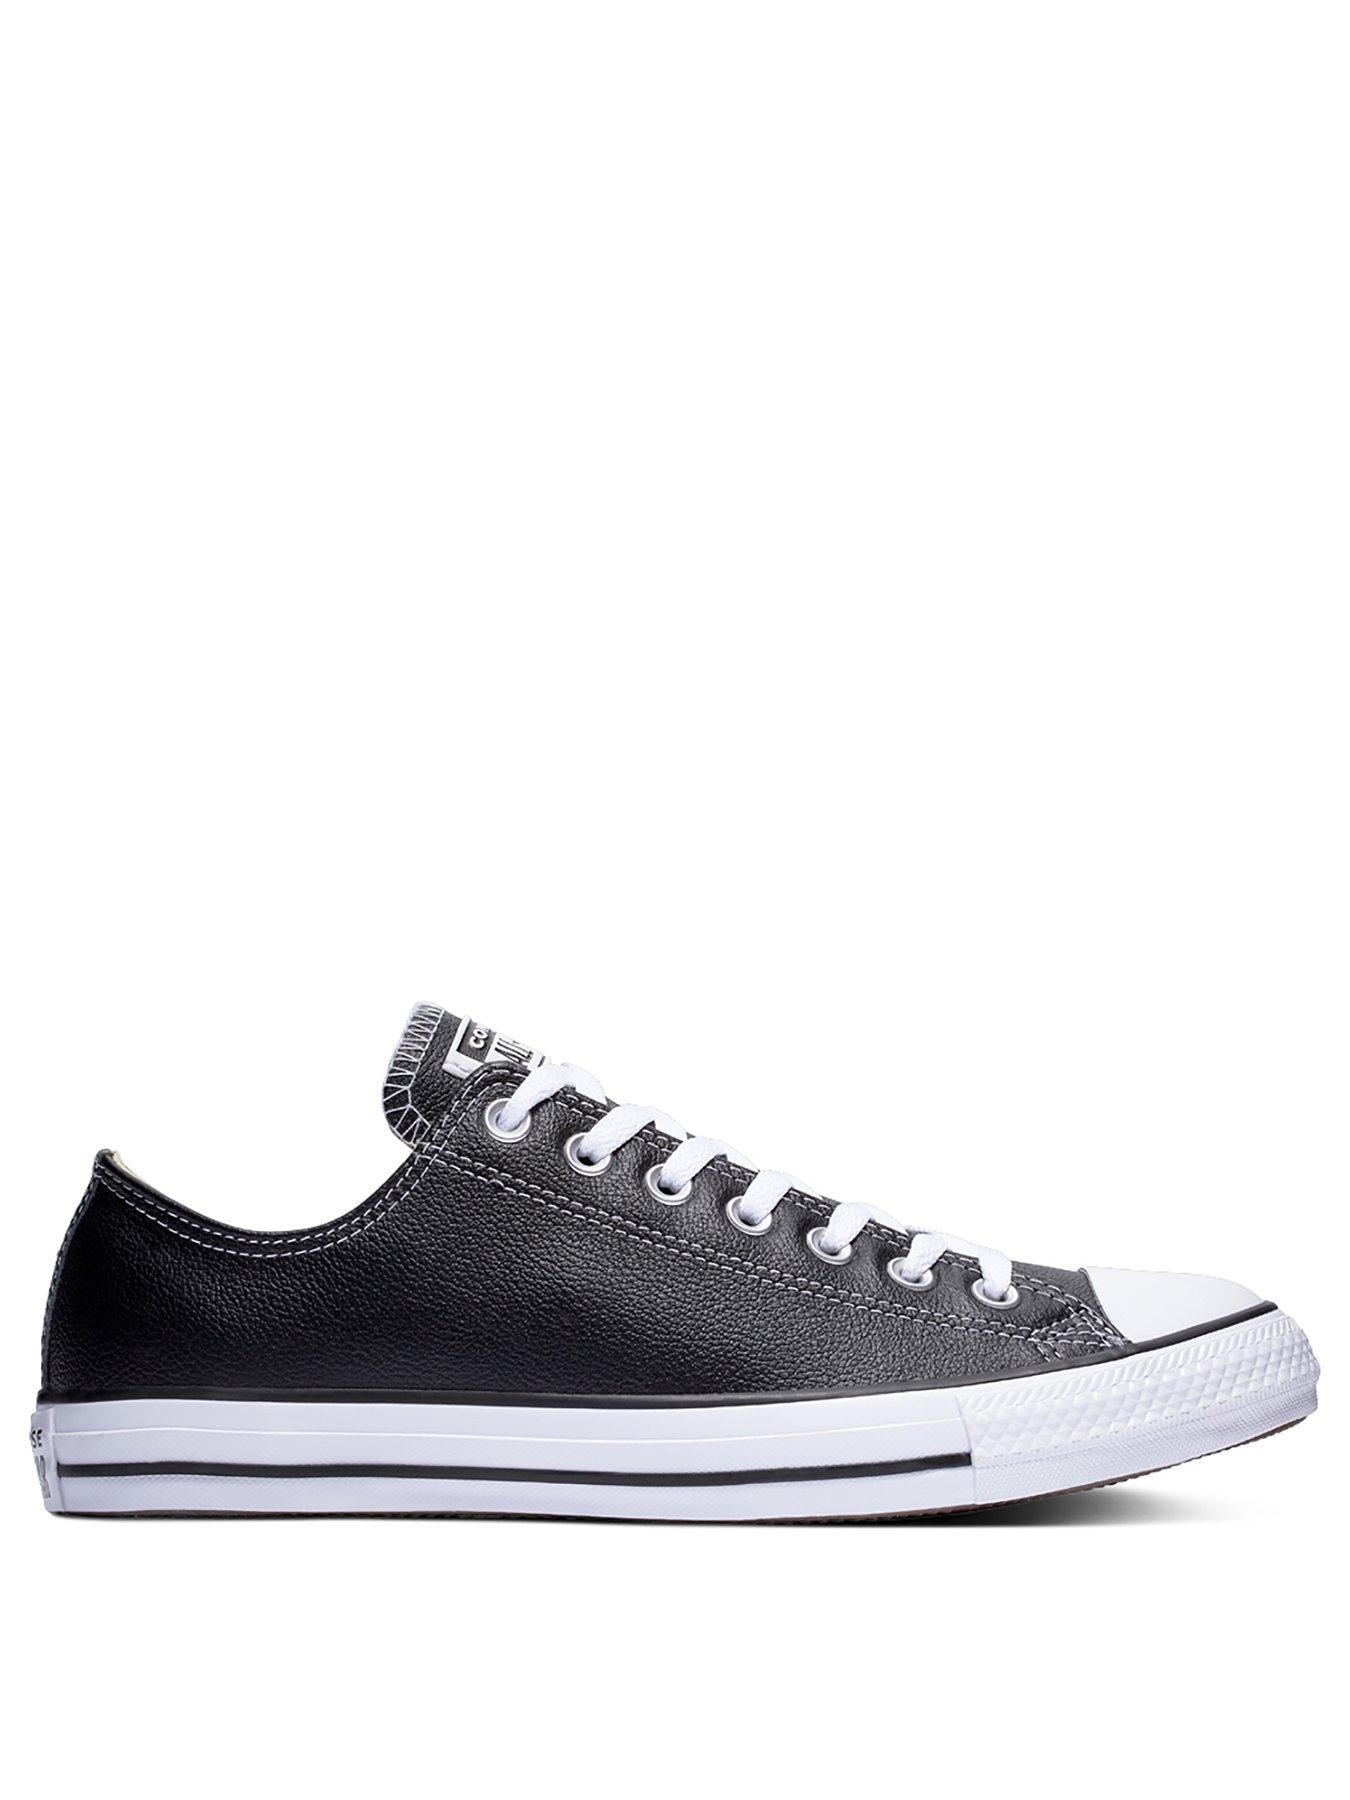 Converse Chuck Taylor Leather All Star 